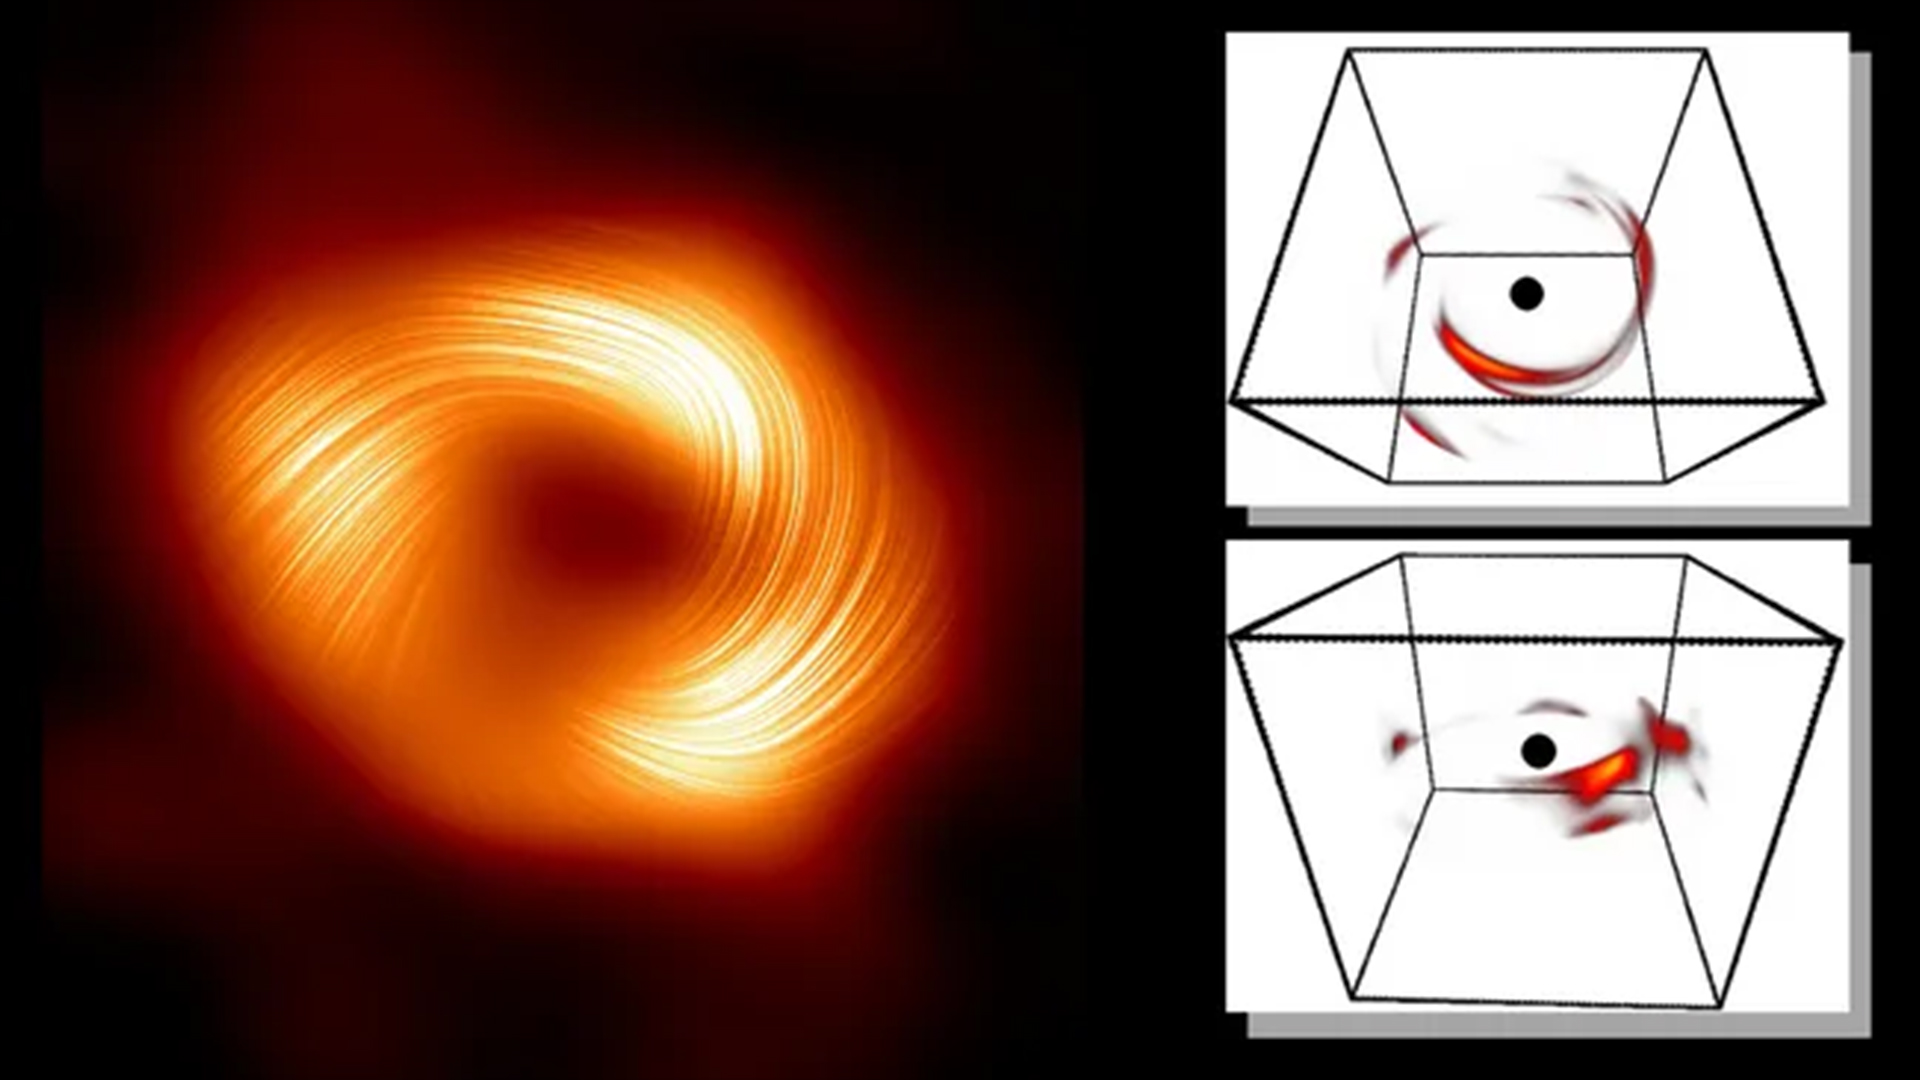 Explosive black hole flare from the center of our galaxy reconstructed from 'a single flickering pixel' using AI and Einstein's equations